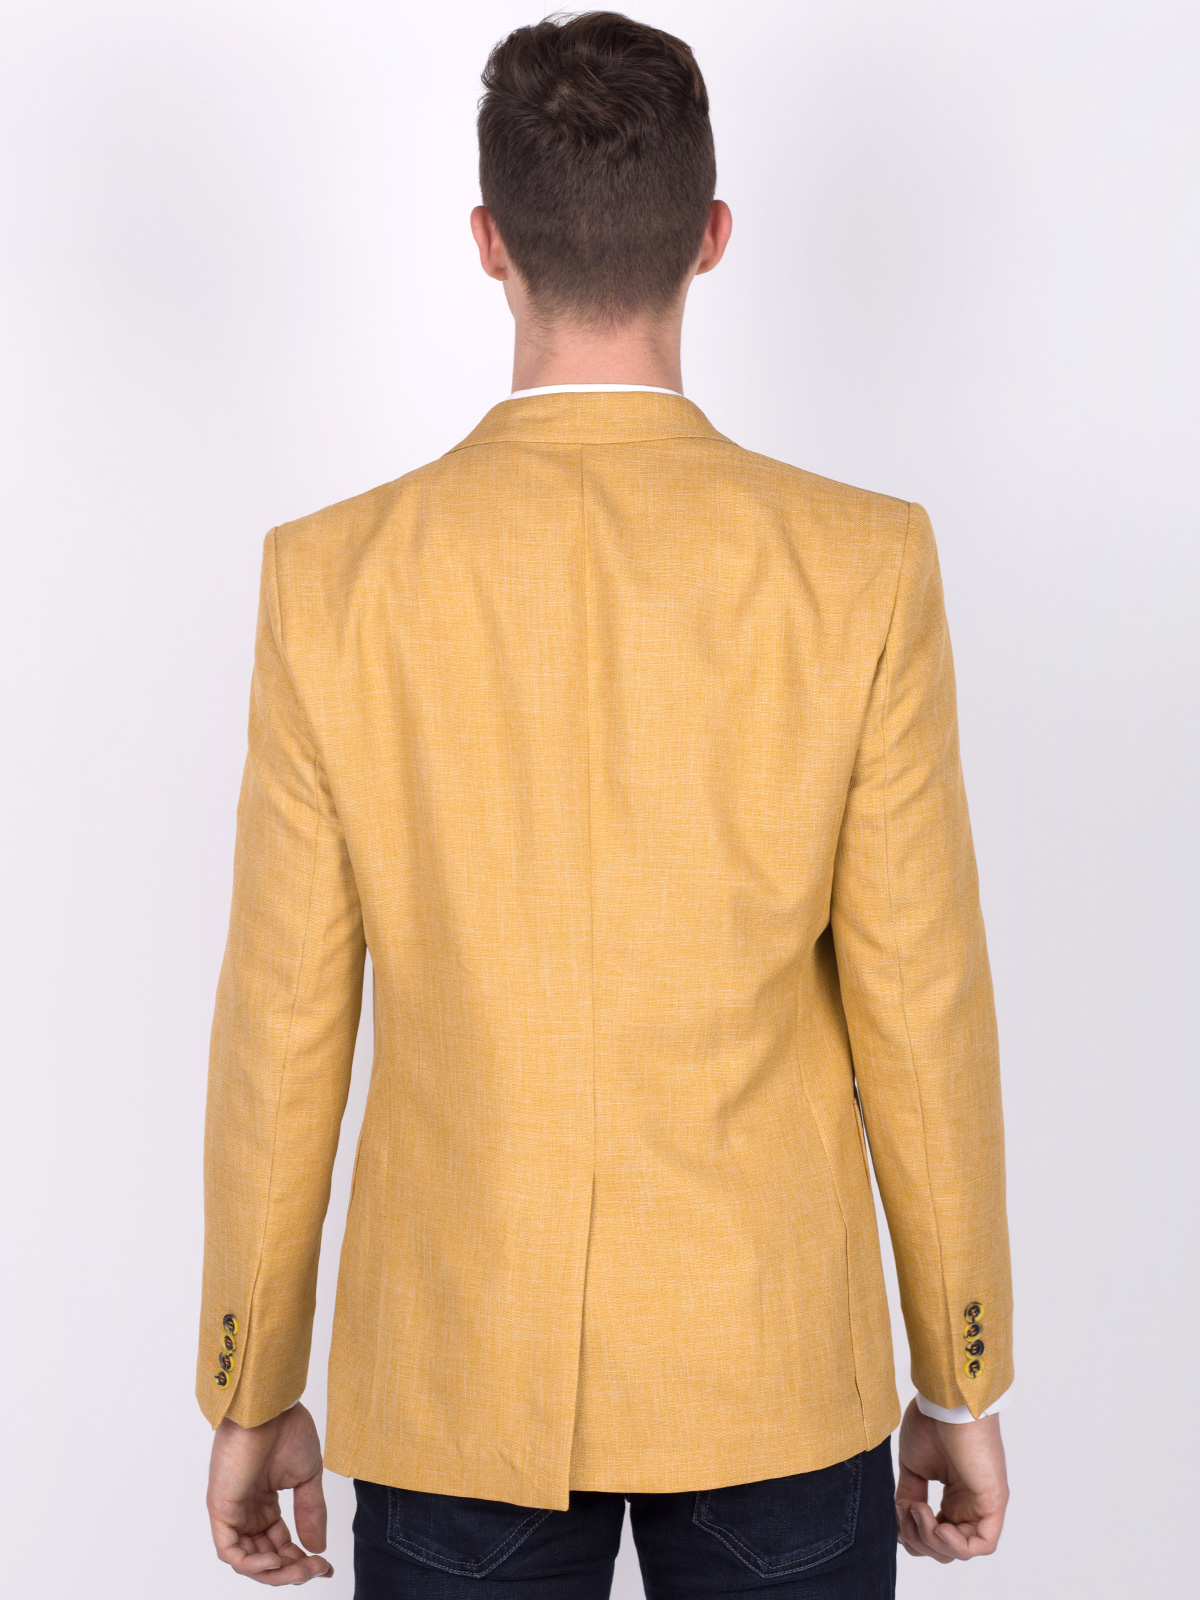  yellow linen and cotton jacket  - 64092 € 66.90 img4